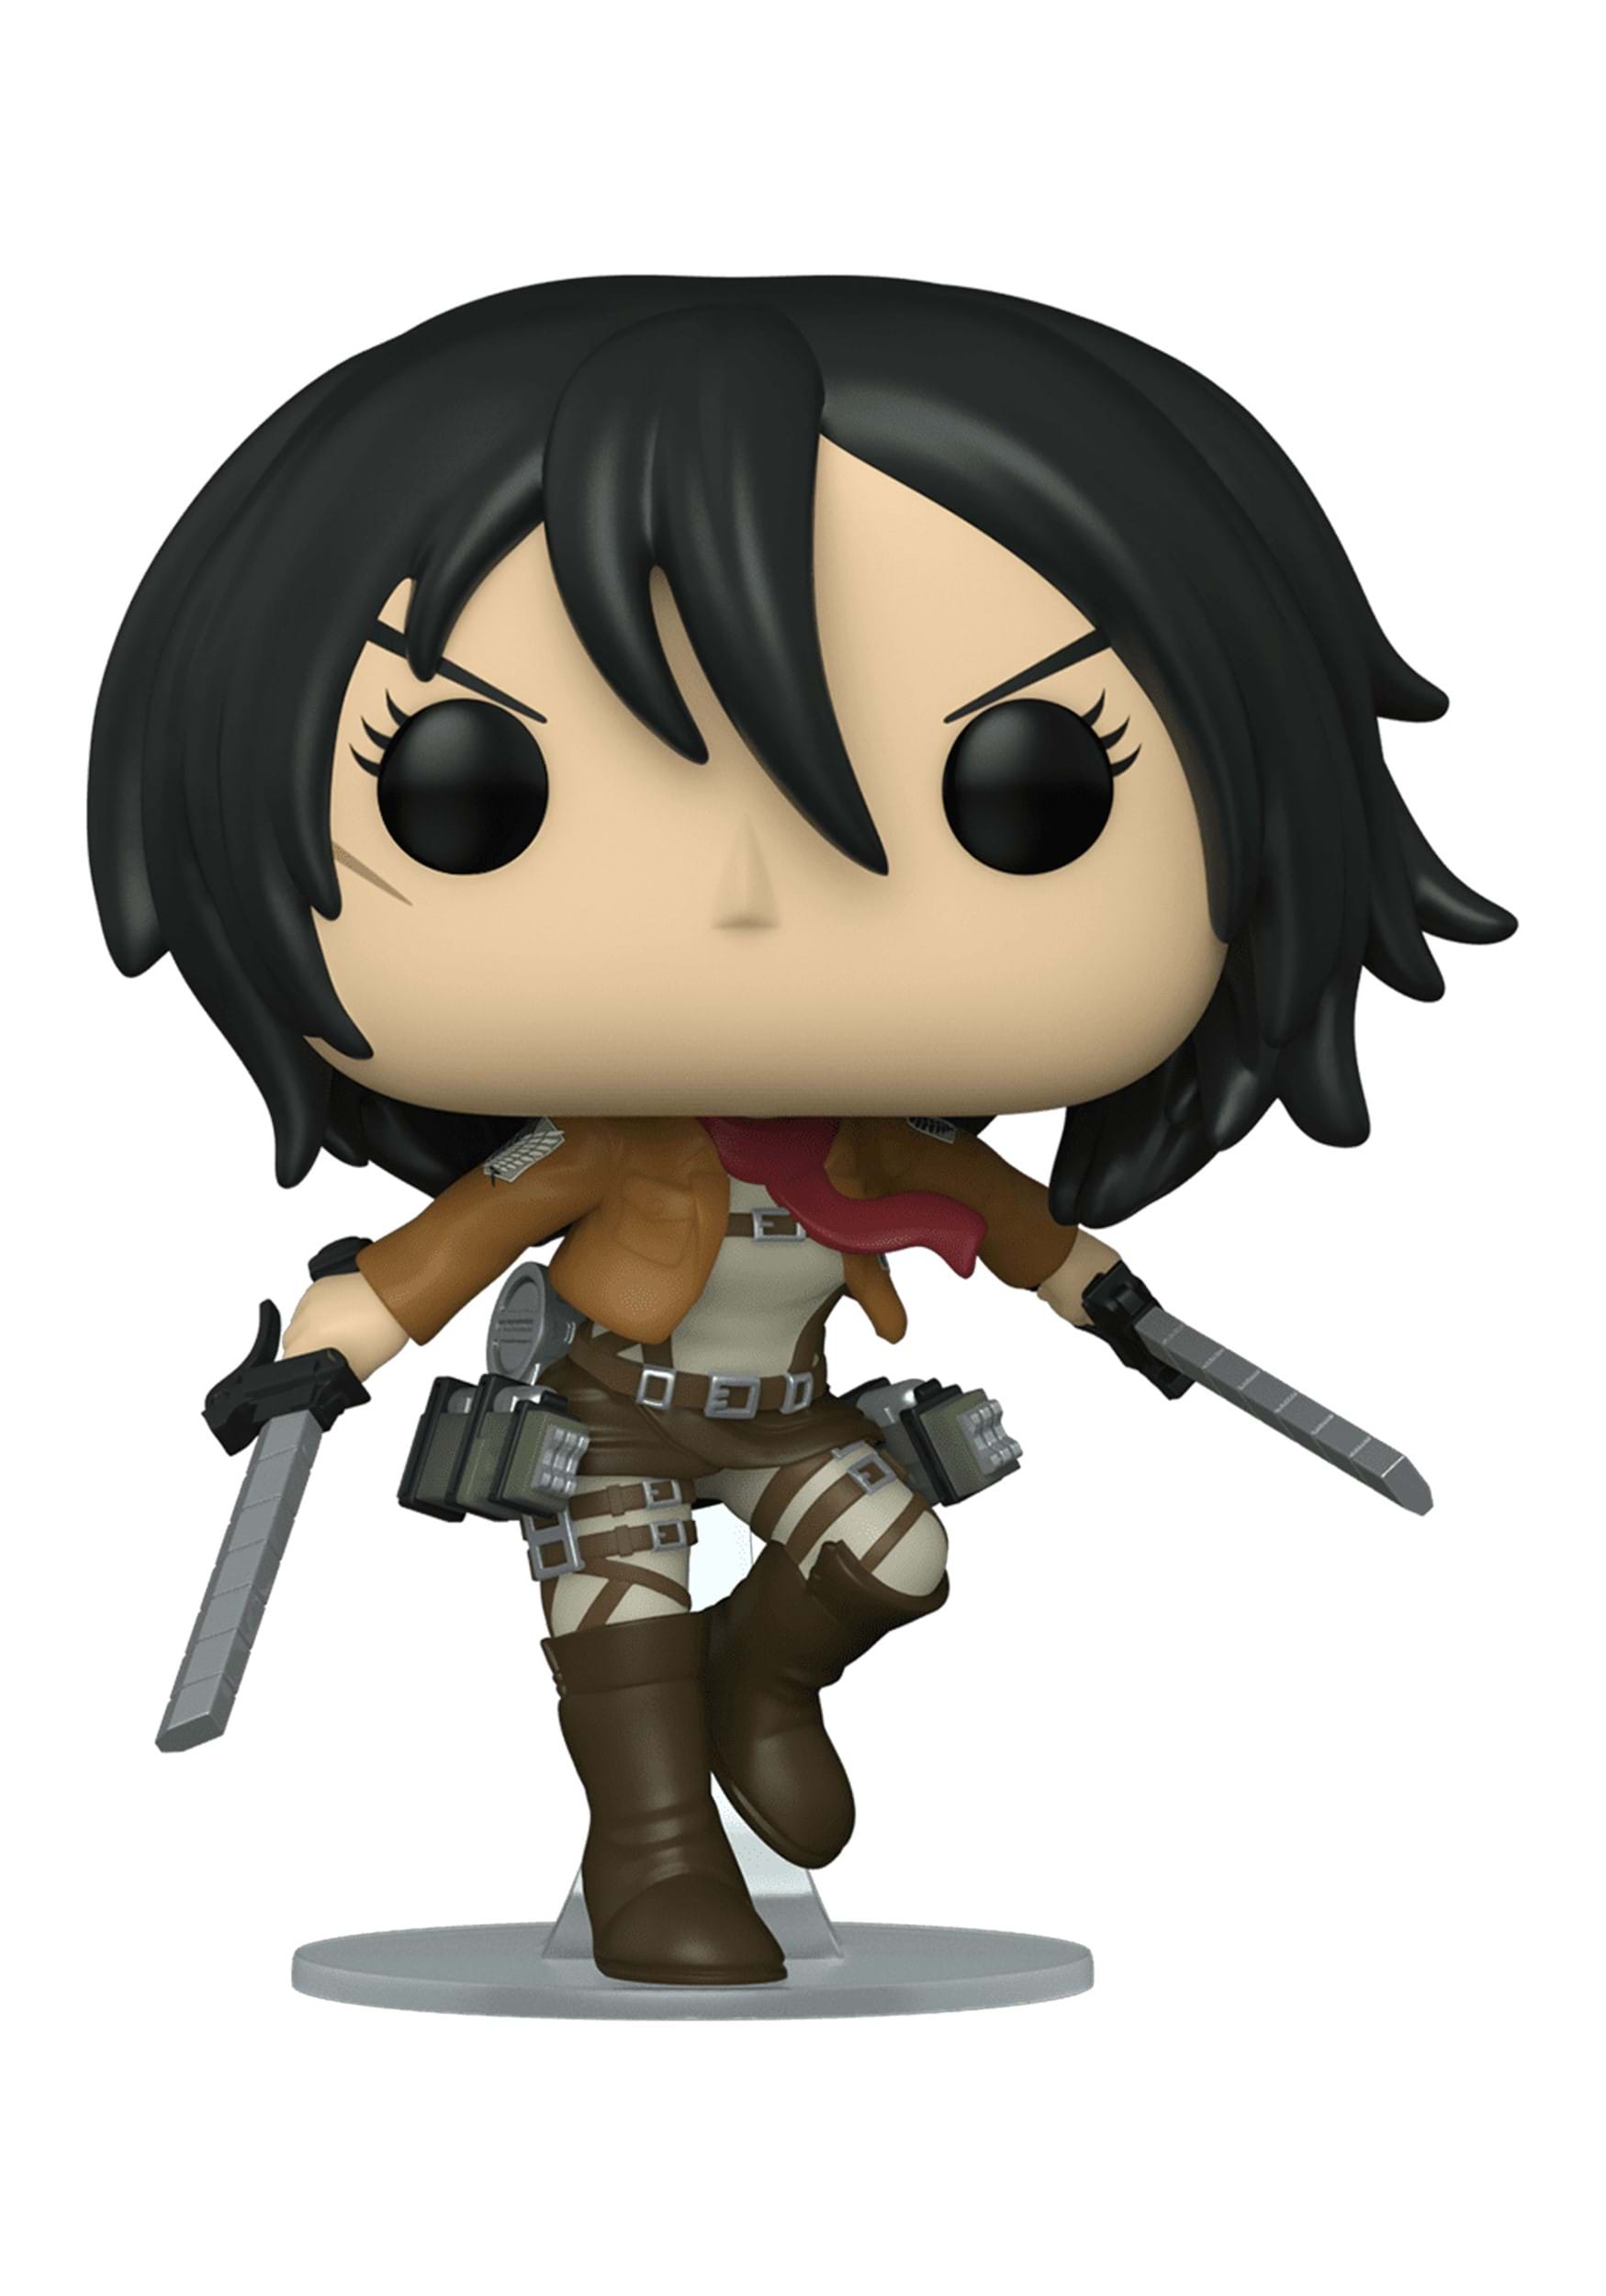 POP! Animation: Attack on Tian - Mikasa with Swords